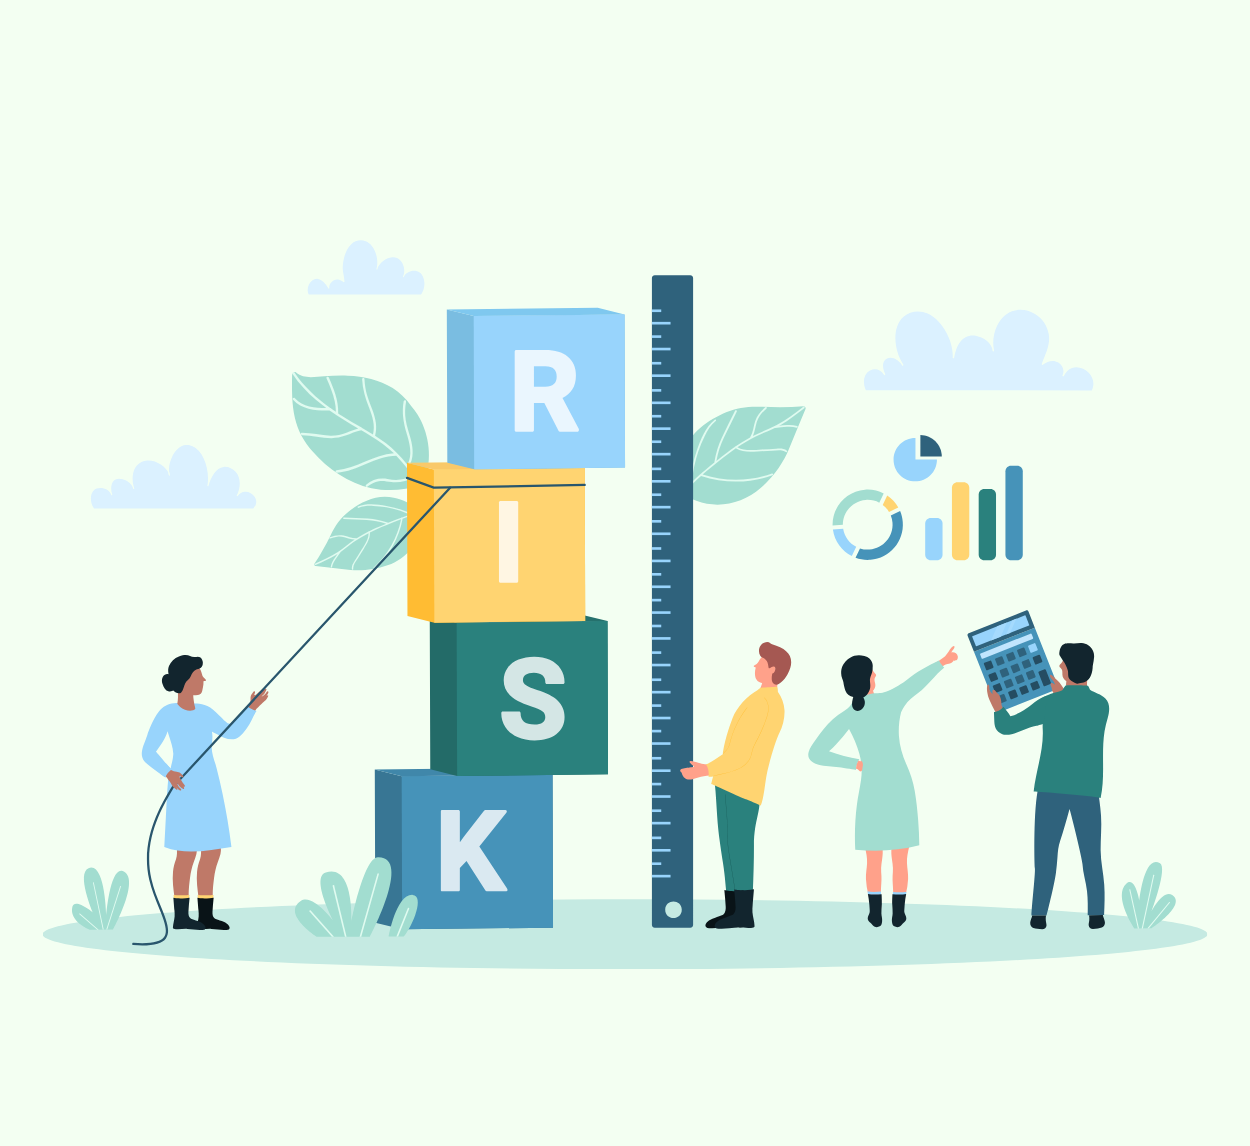 Identifying risks in business